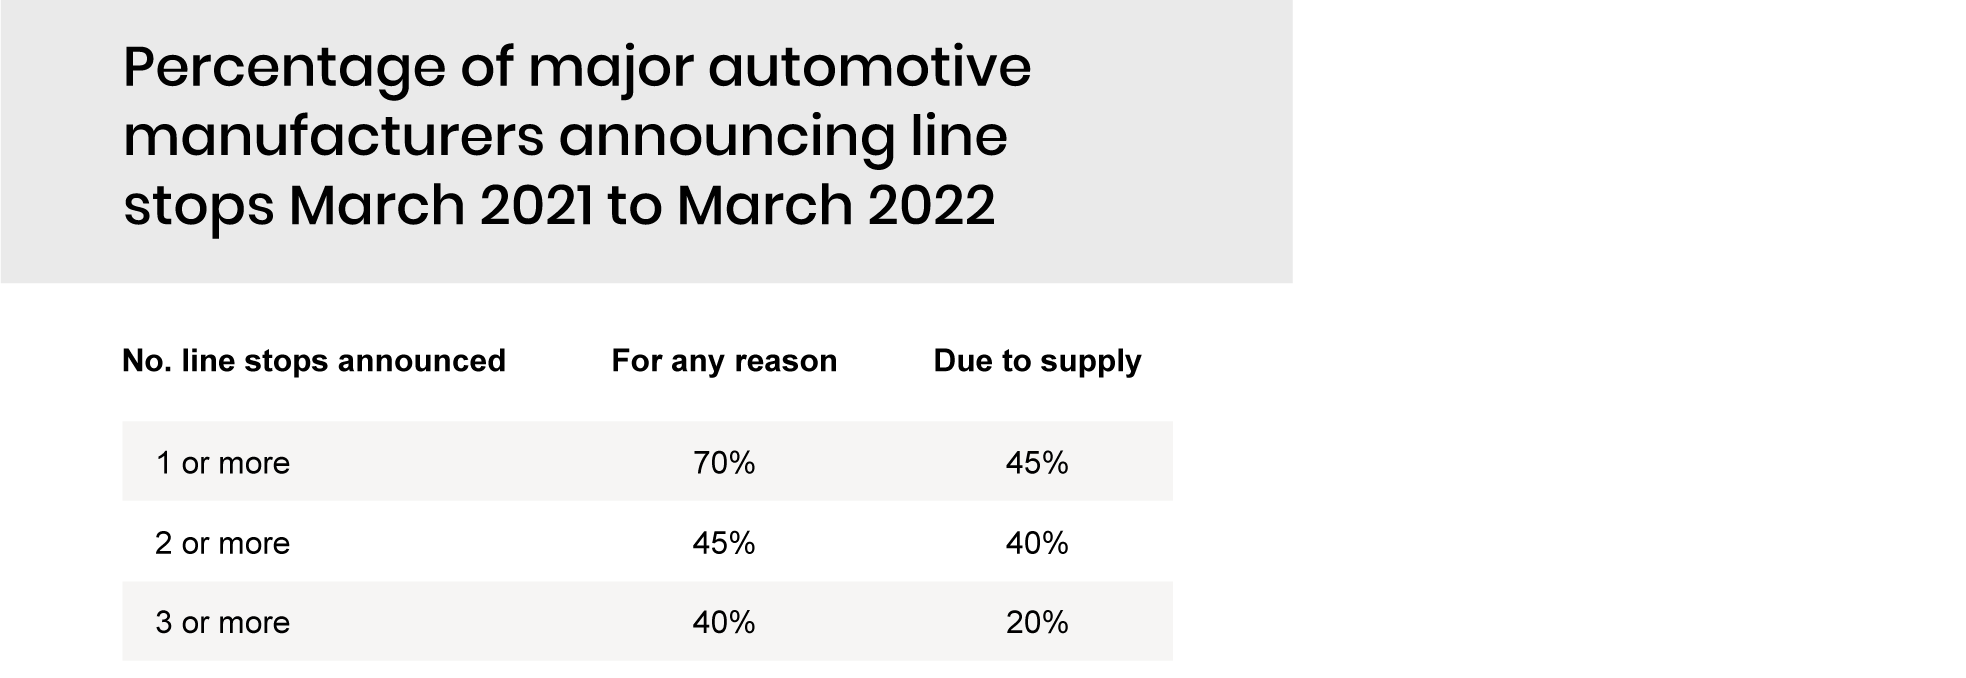 Percentage of major automotive manufacturers announcing line stops March 2021 to March 2022